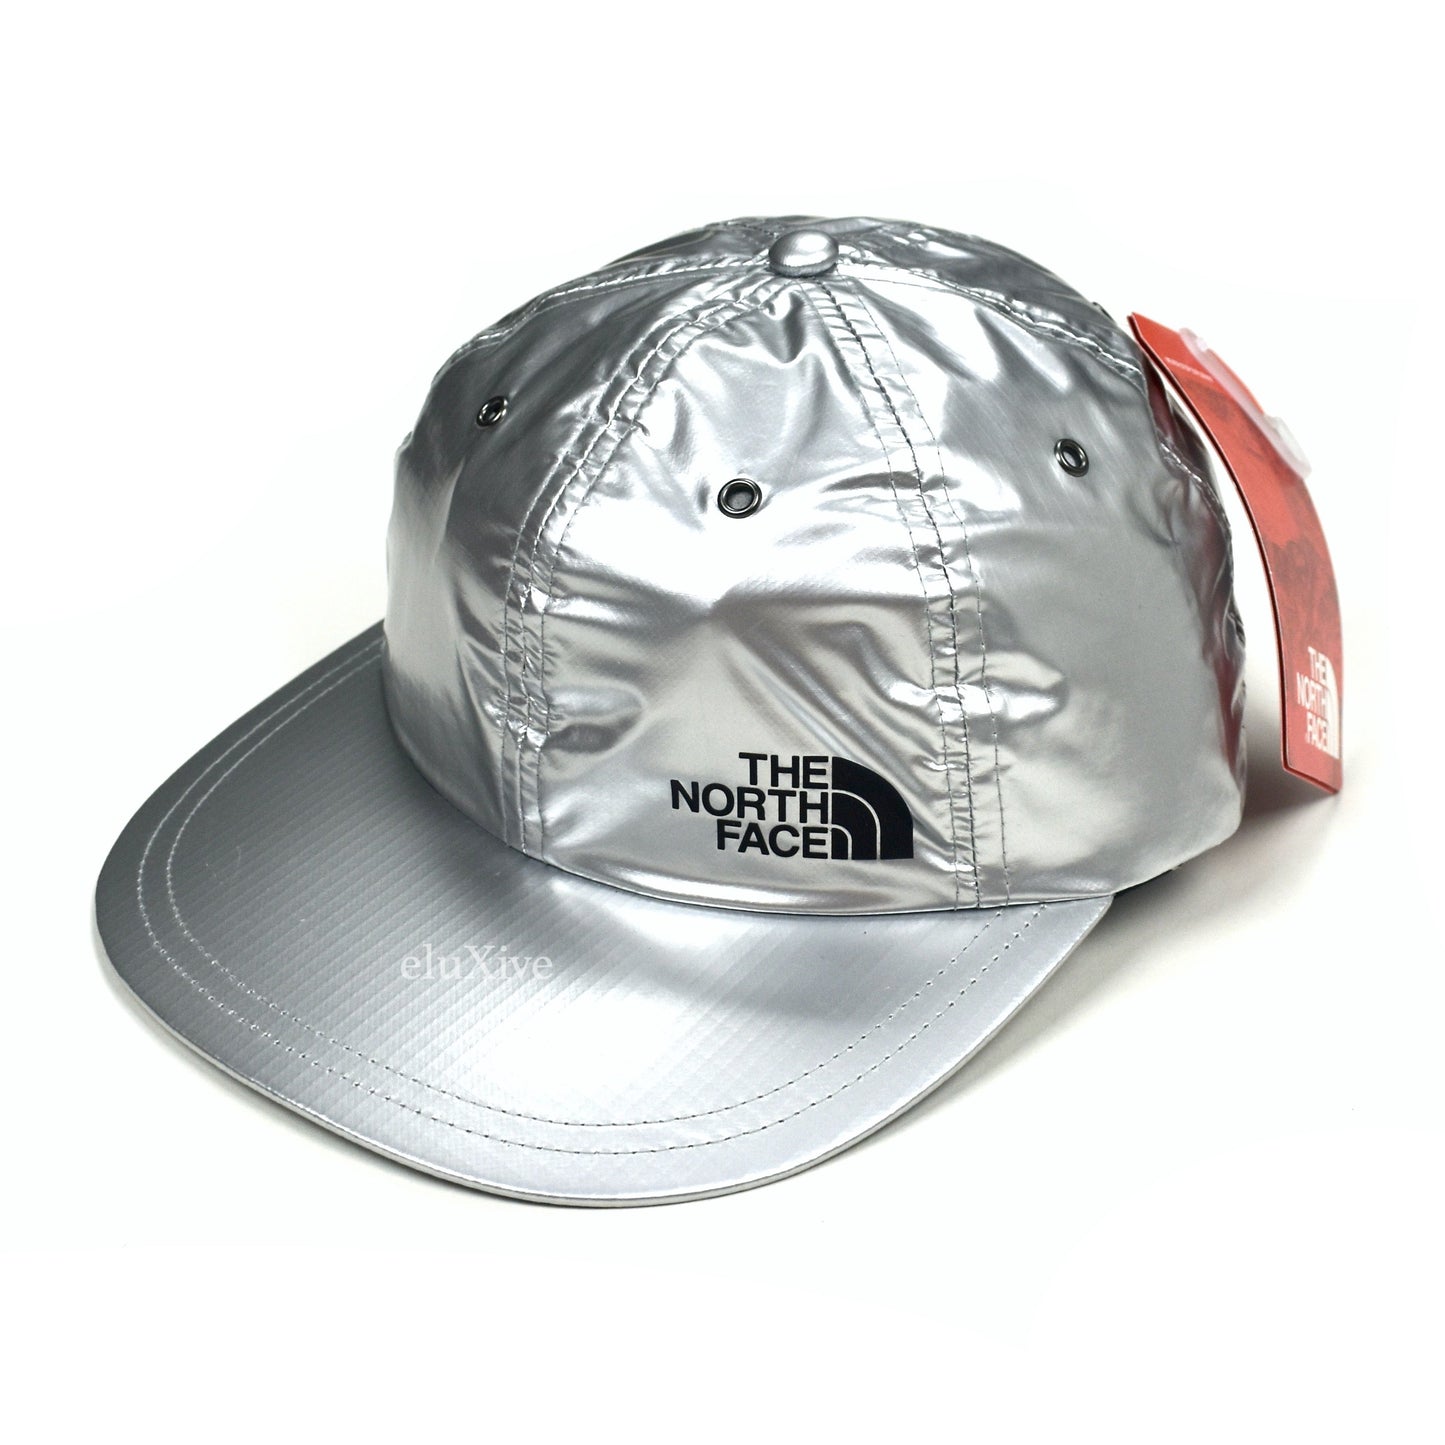 Supreme x The North Face - Metallic Silver Logo Hat (SS18)